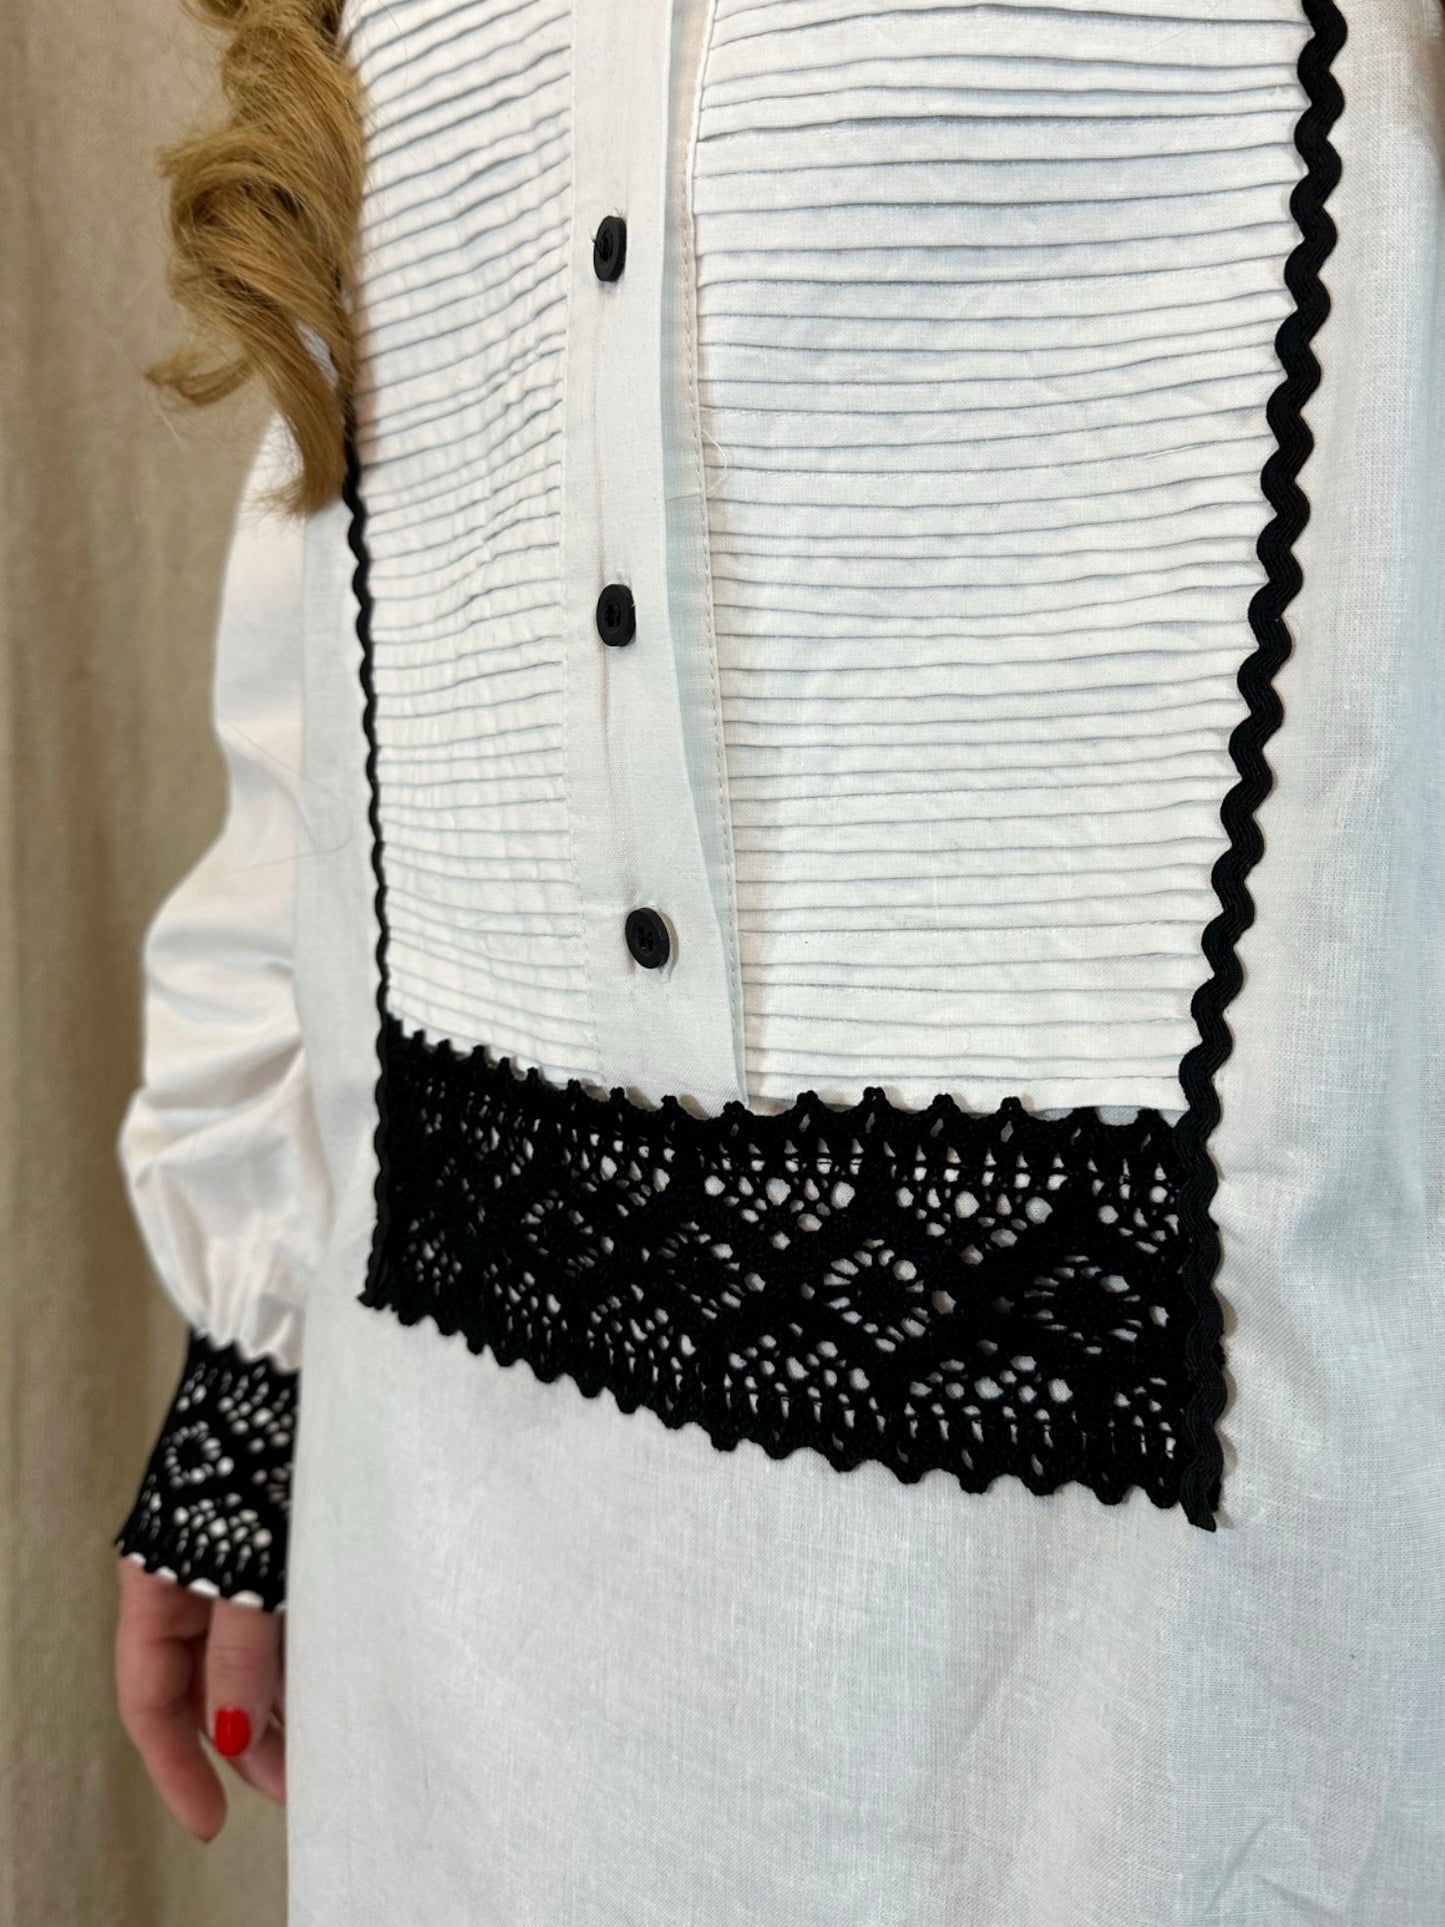 Long White Shirt With Traditional Lace Details